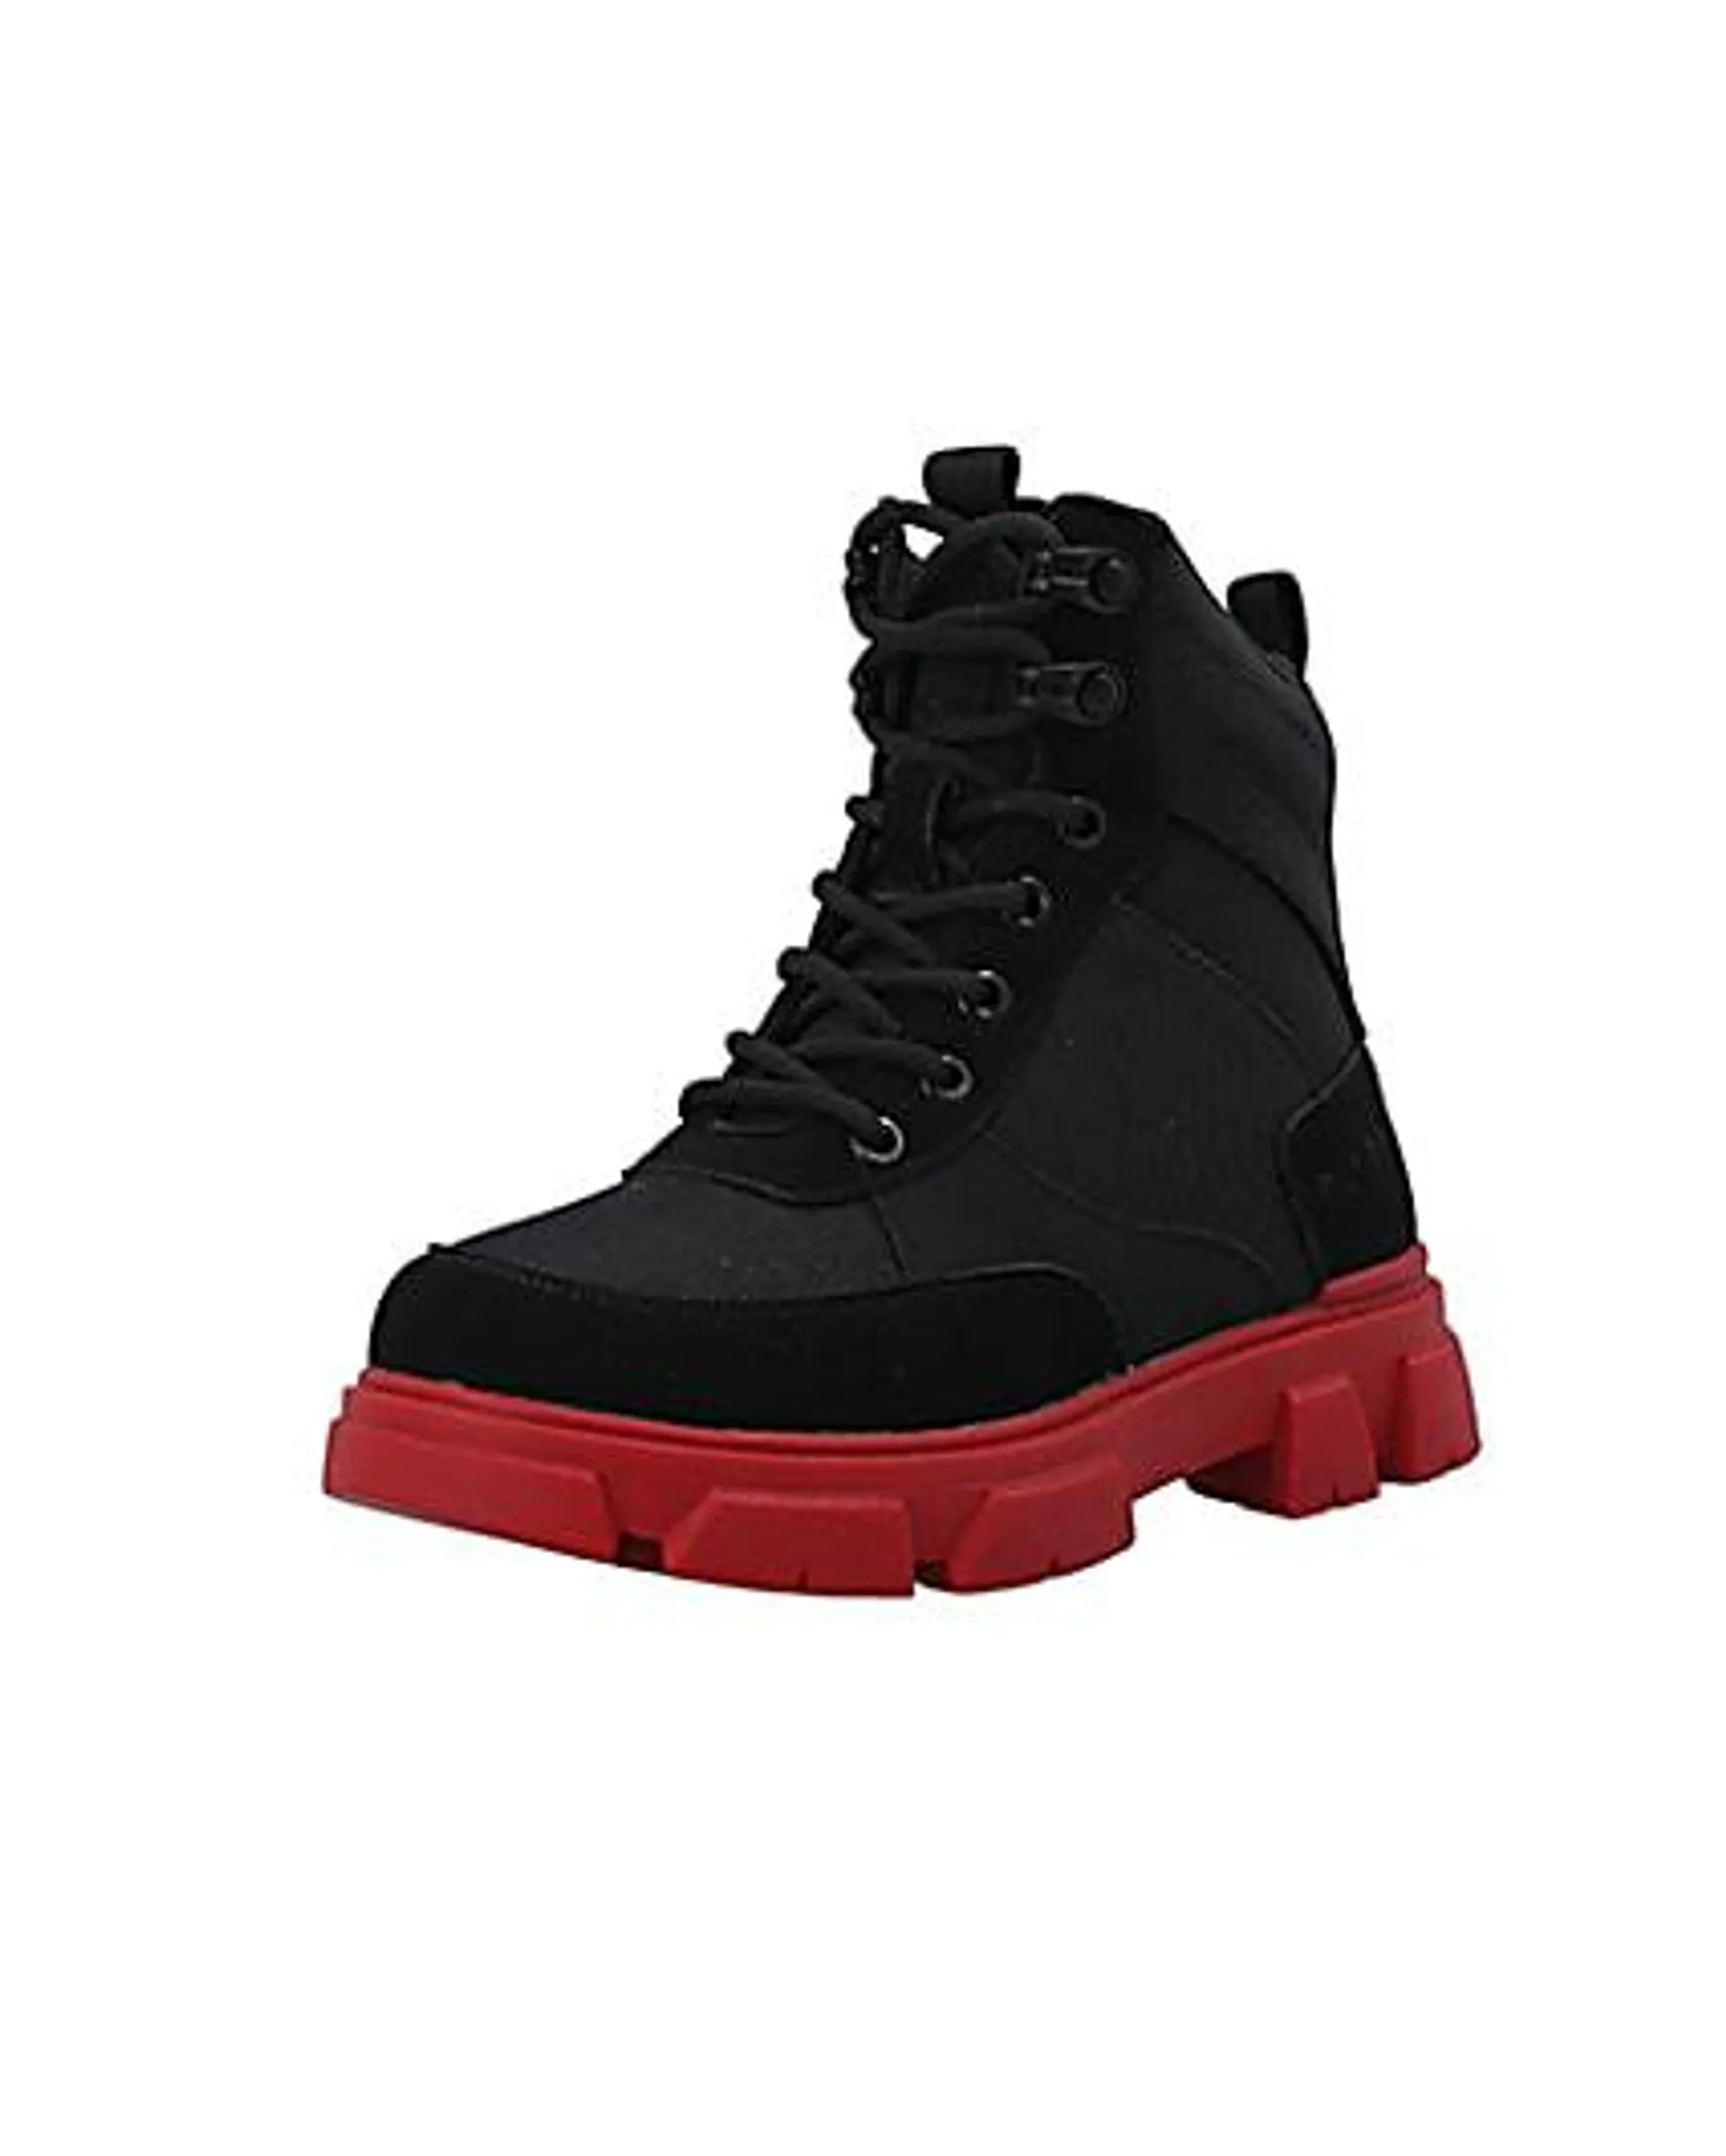 Boys lace up ankle boots